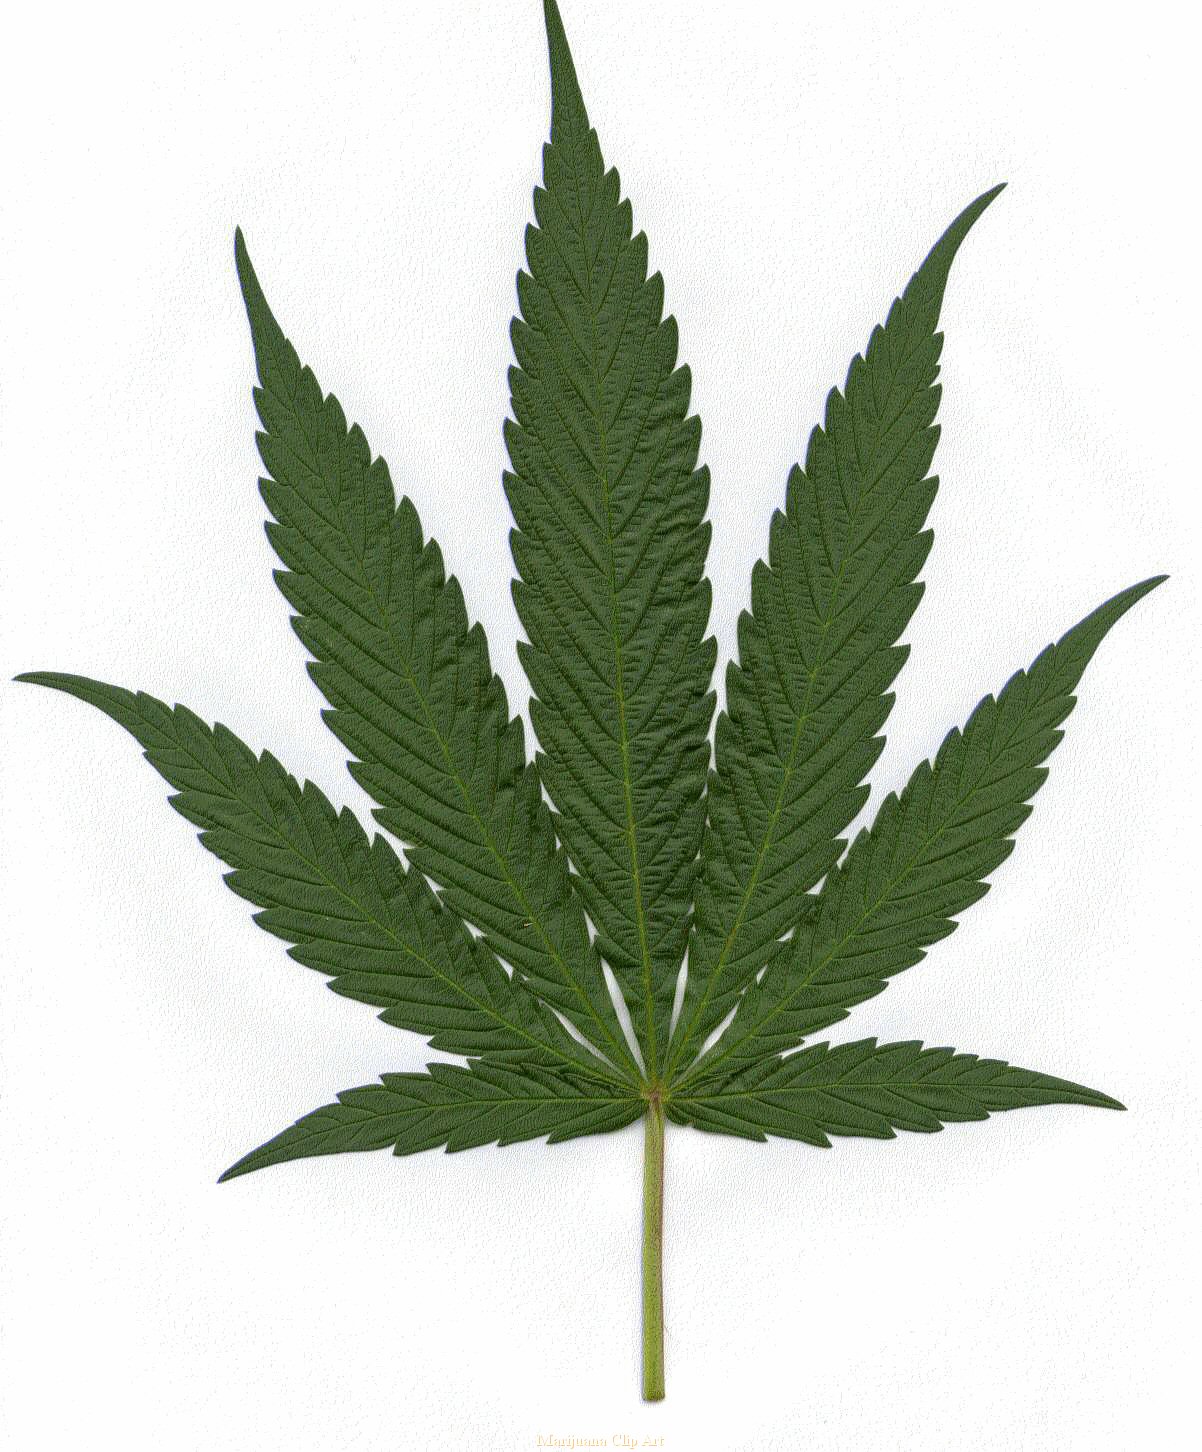 Weed Leaf - ClipArt Best